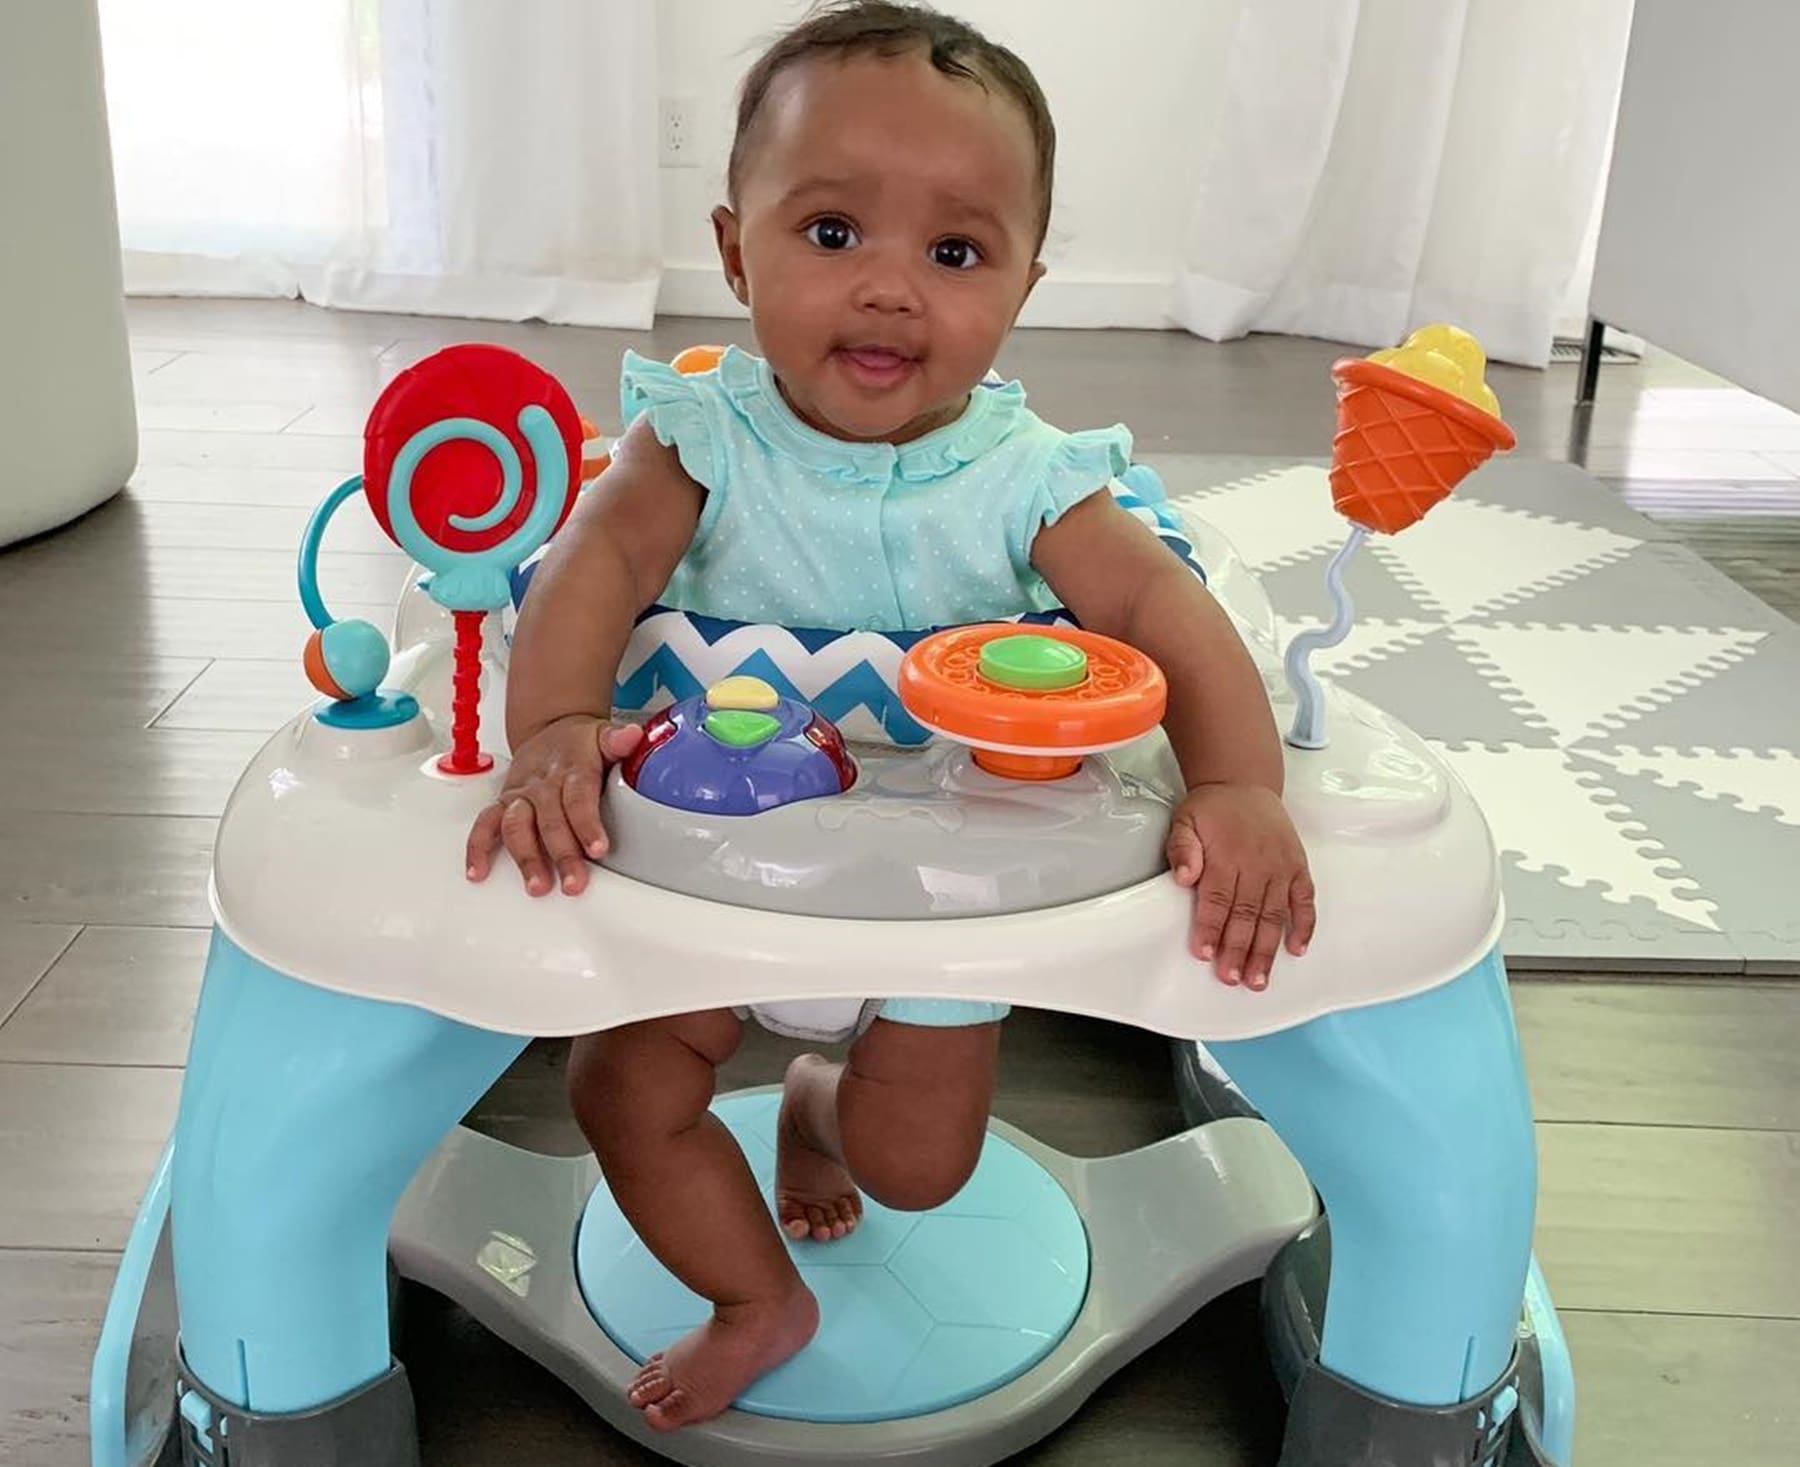 Kenya Moore And Marc Daly's Daughter, Brooklyn Is 1 Year Old!